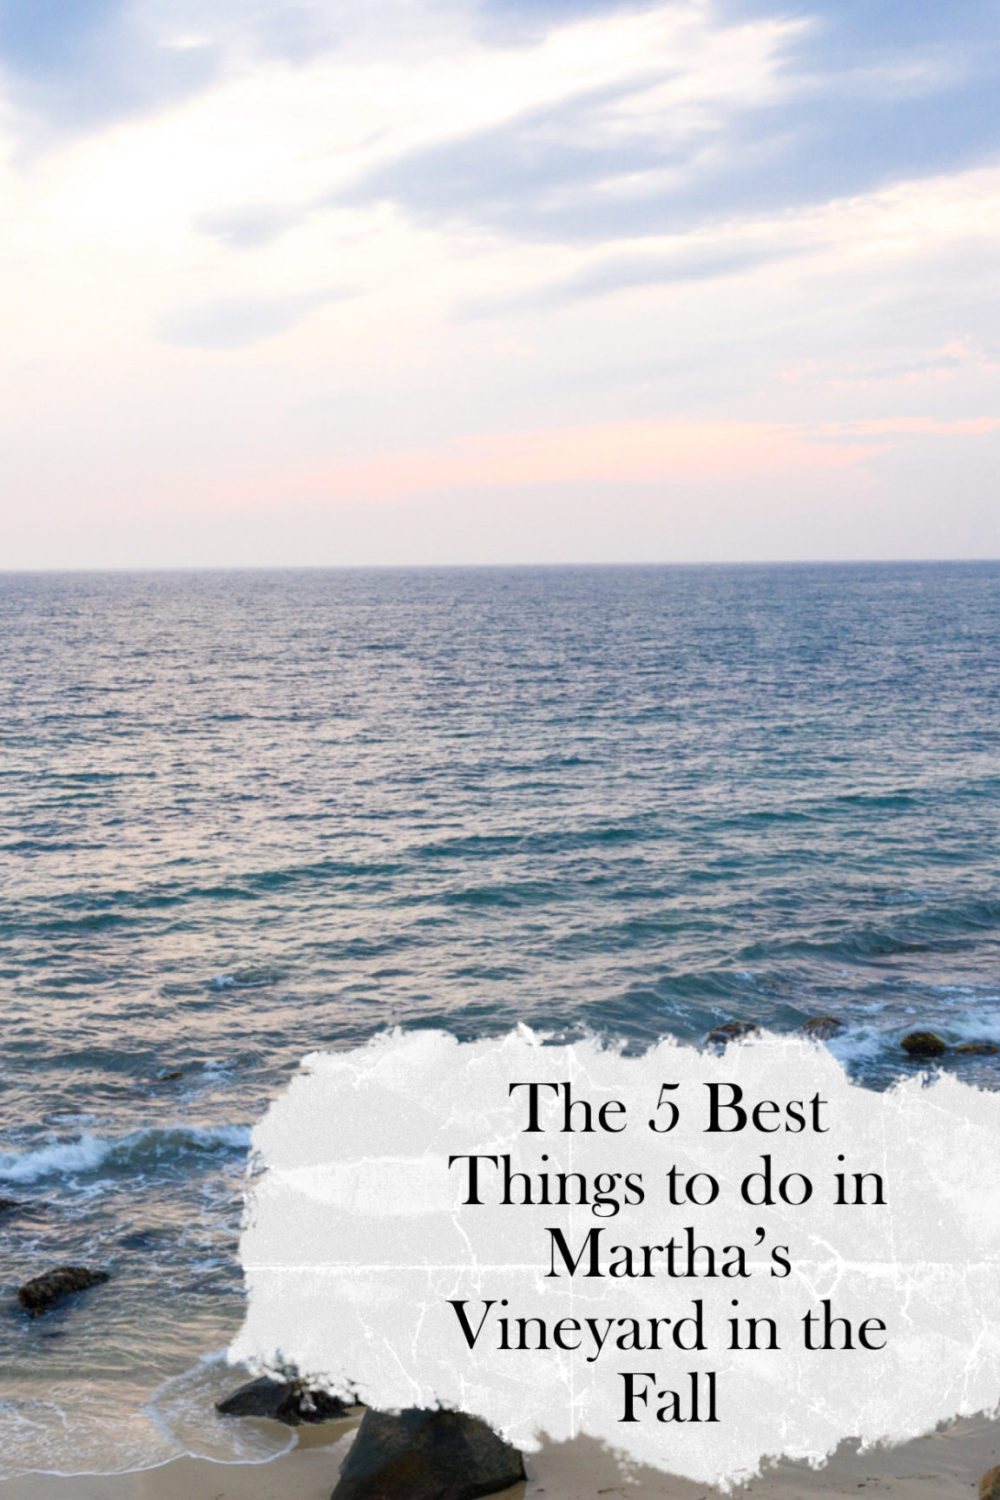 The 5 Best Things to do in Martha's Vineyard in October featured by top New England travel blogger, Shannon Shipman